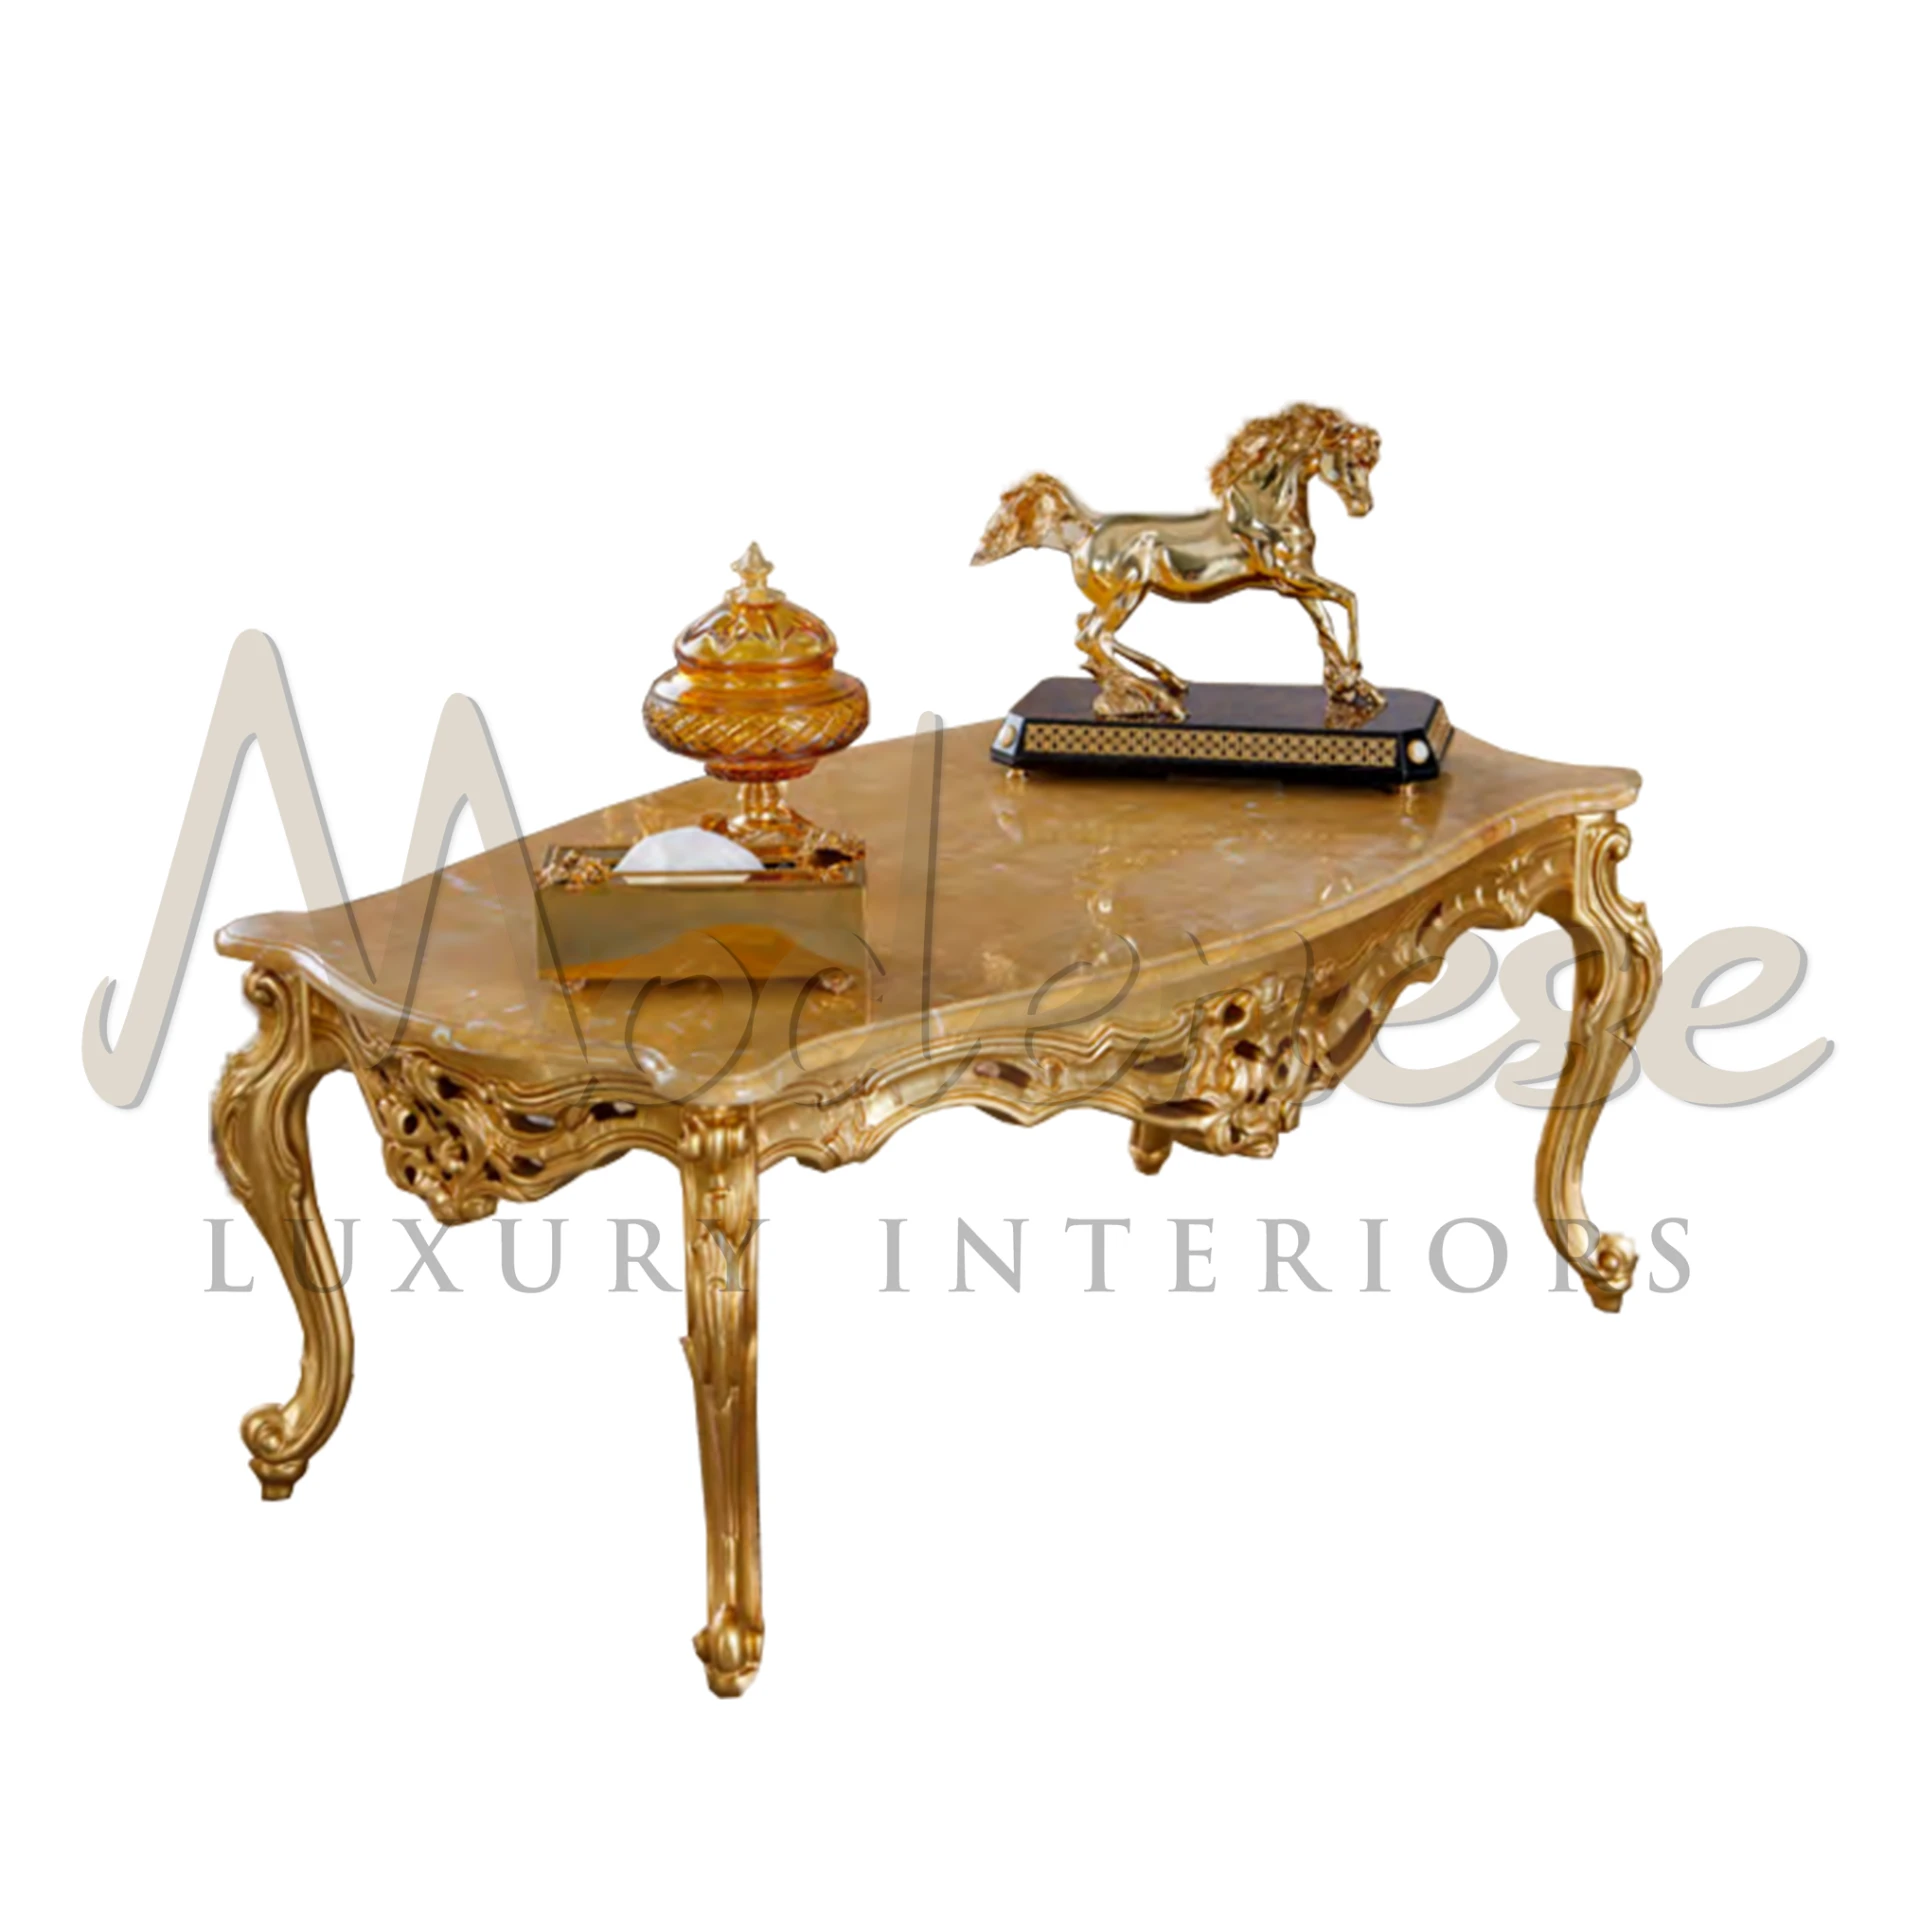  Luxury Gilded Rectangular Coffee Table, classic elegance for sophisticated interiors.
